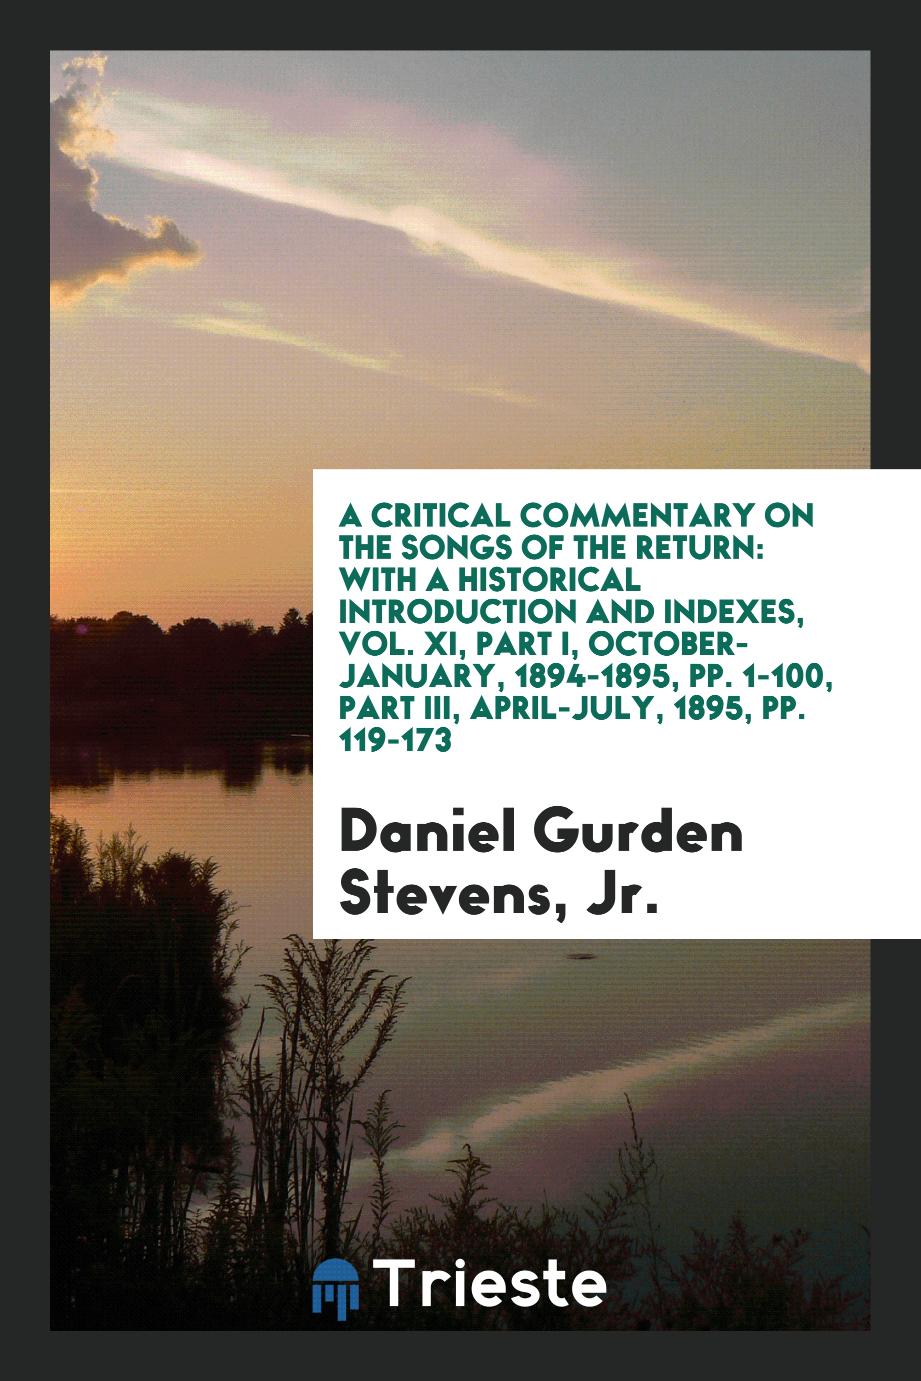 A Critical Commentary on the Songs of the Return: With a Historical Introduction and Indexes, Vol. XI, Part I, October-January, 1894-1895, pp. 1-100, Part III, April-July, 1895, pp. 119-173